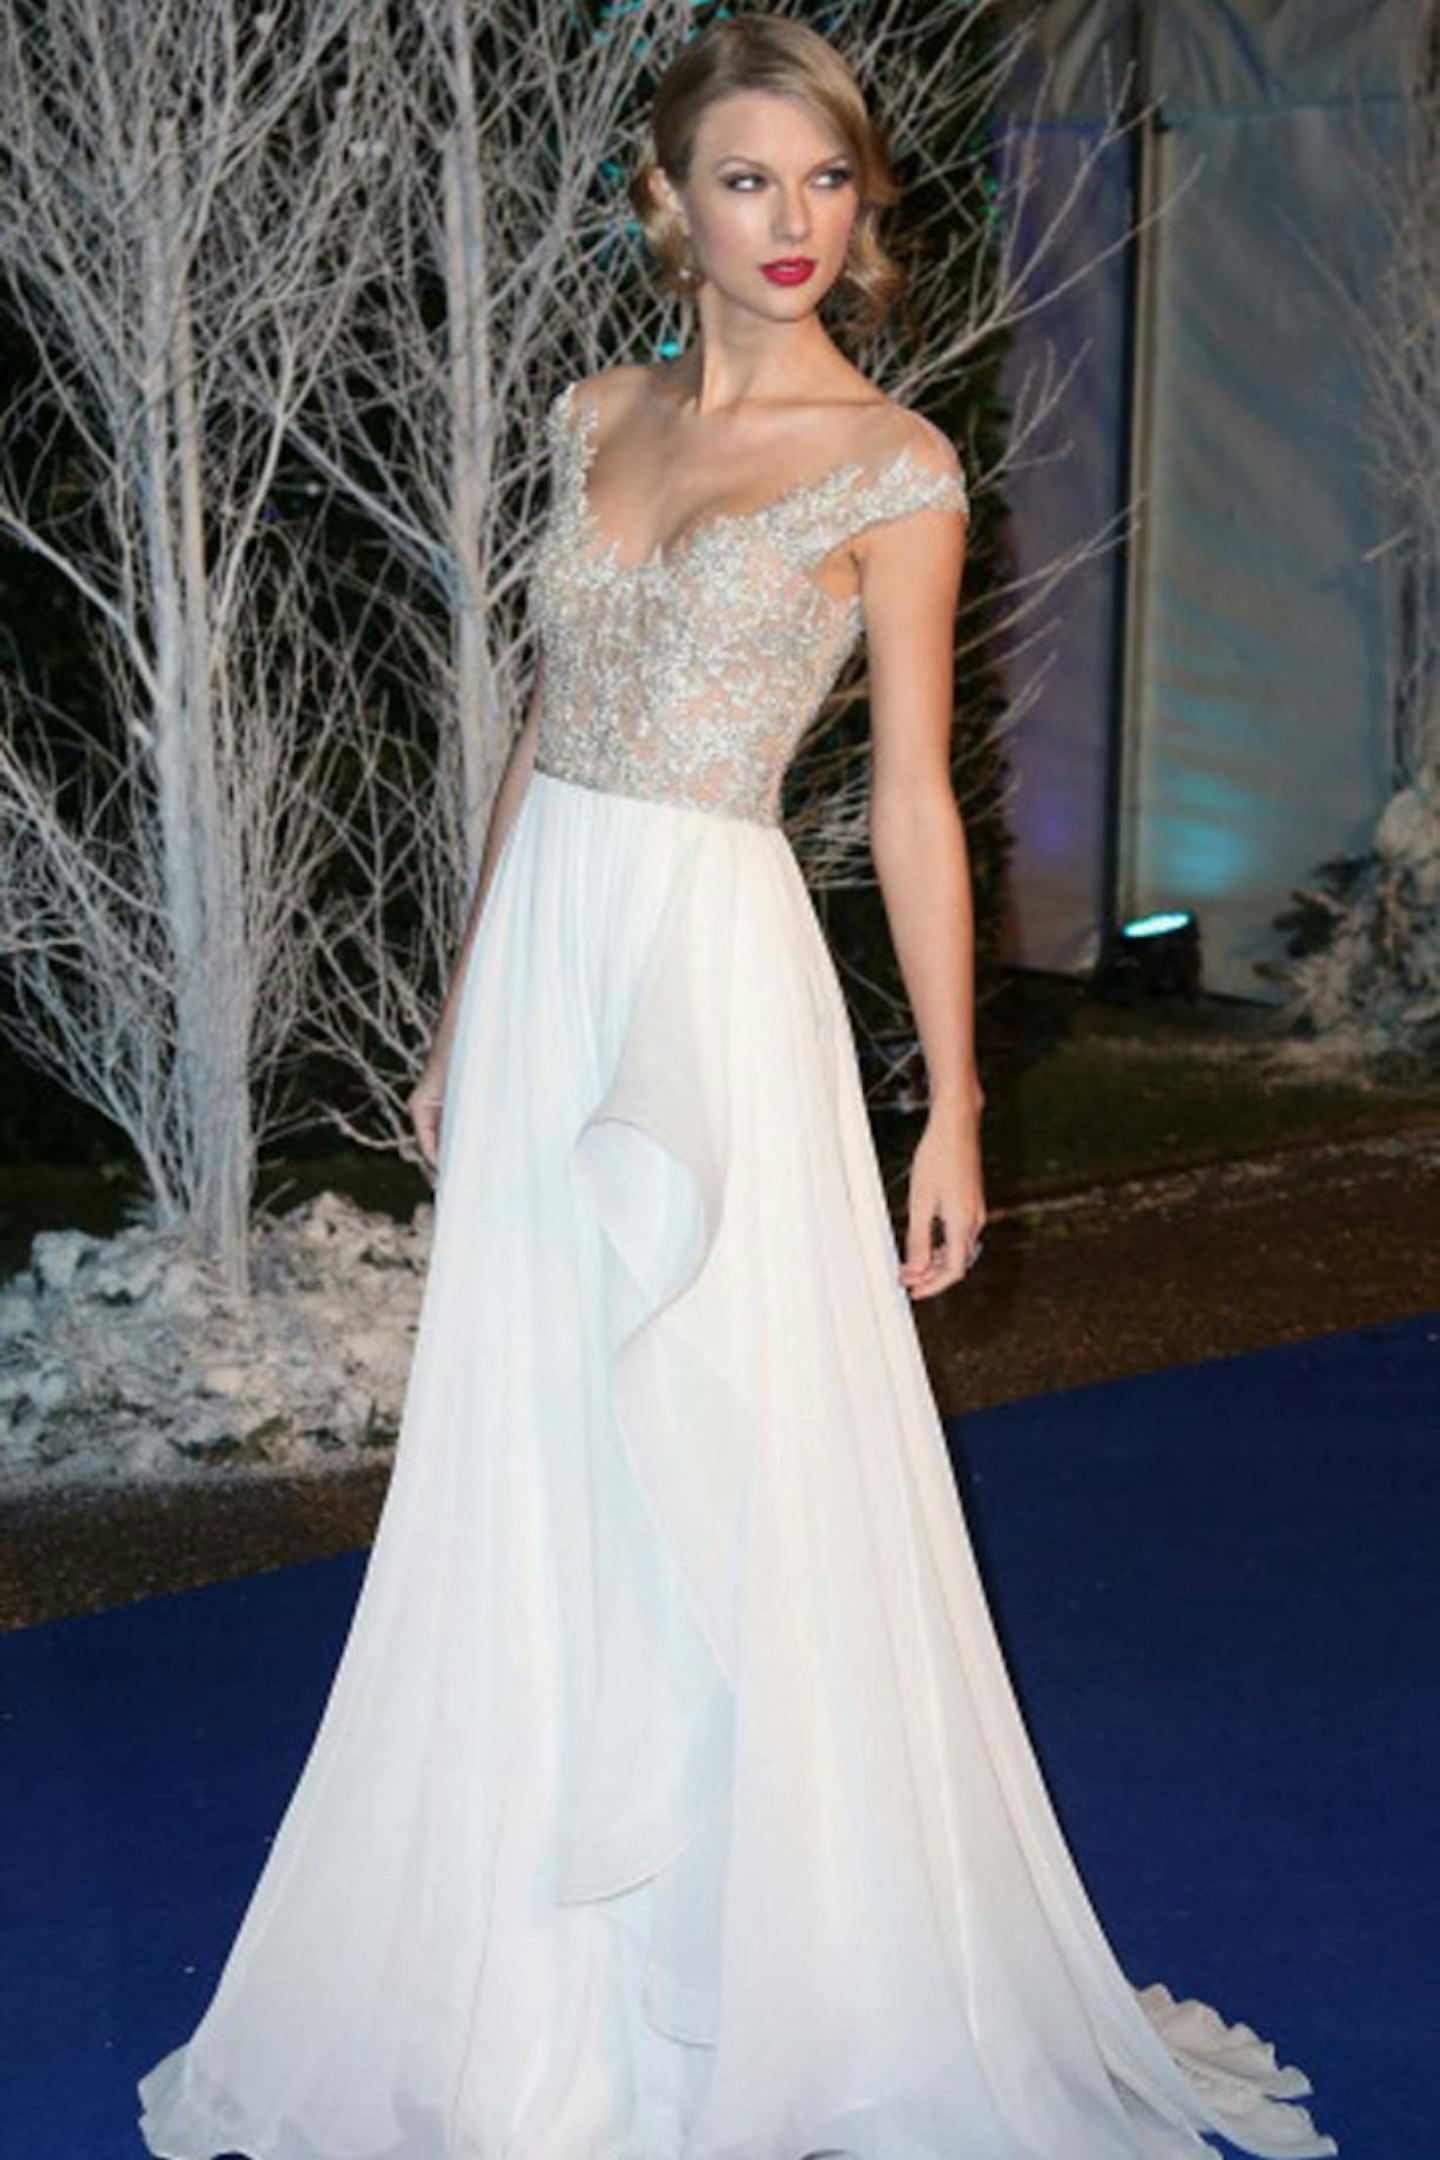 Taylor Swift in Stella McCartney at Kensington Palace for the Centrepoint Winter Whites Gala, 26 November 2013